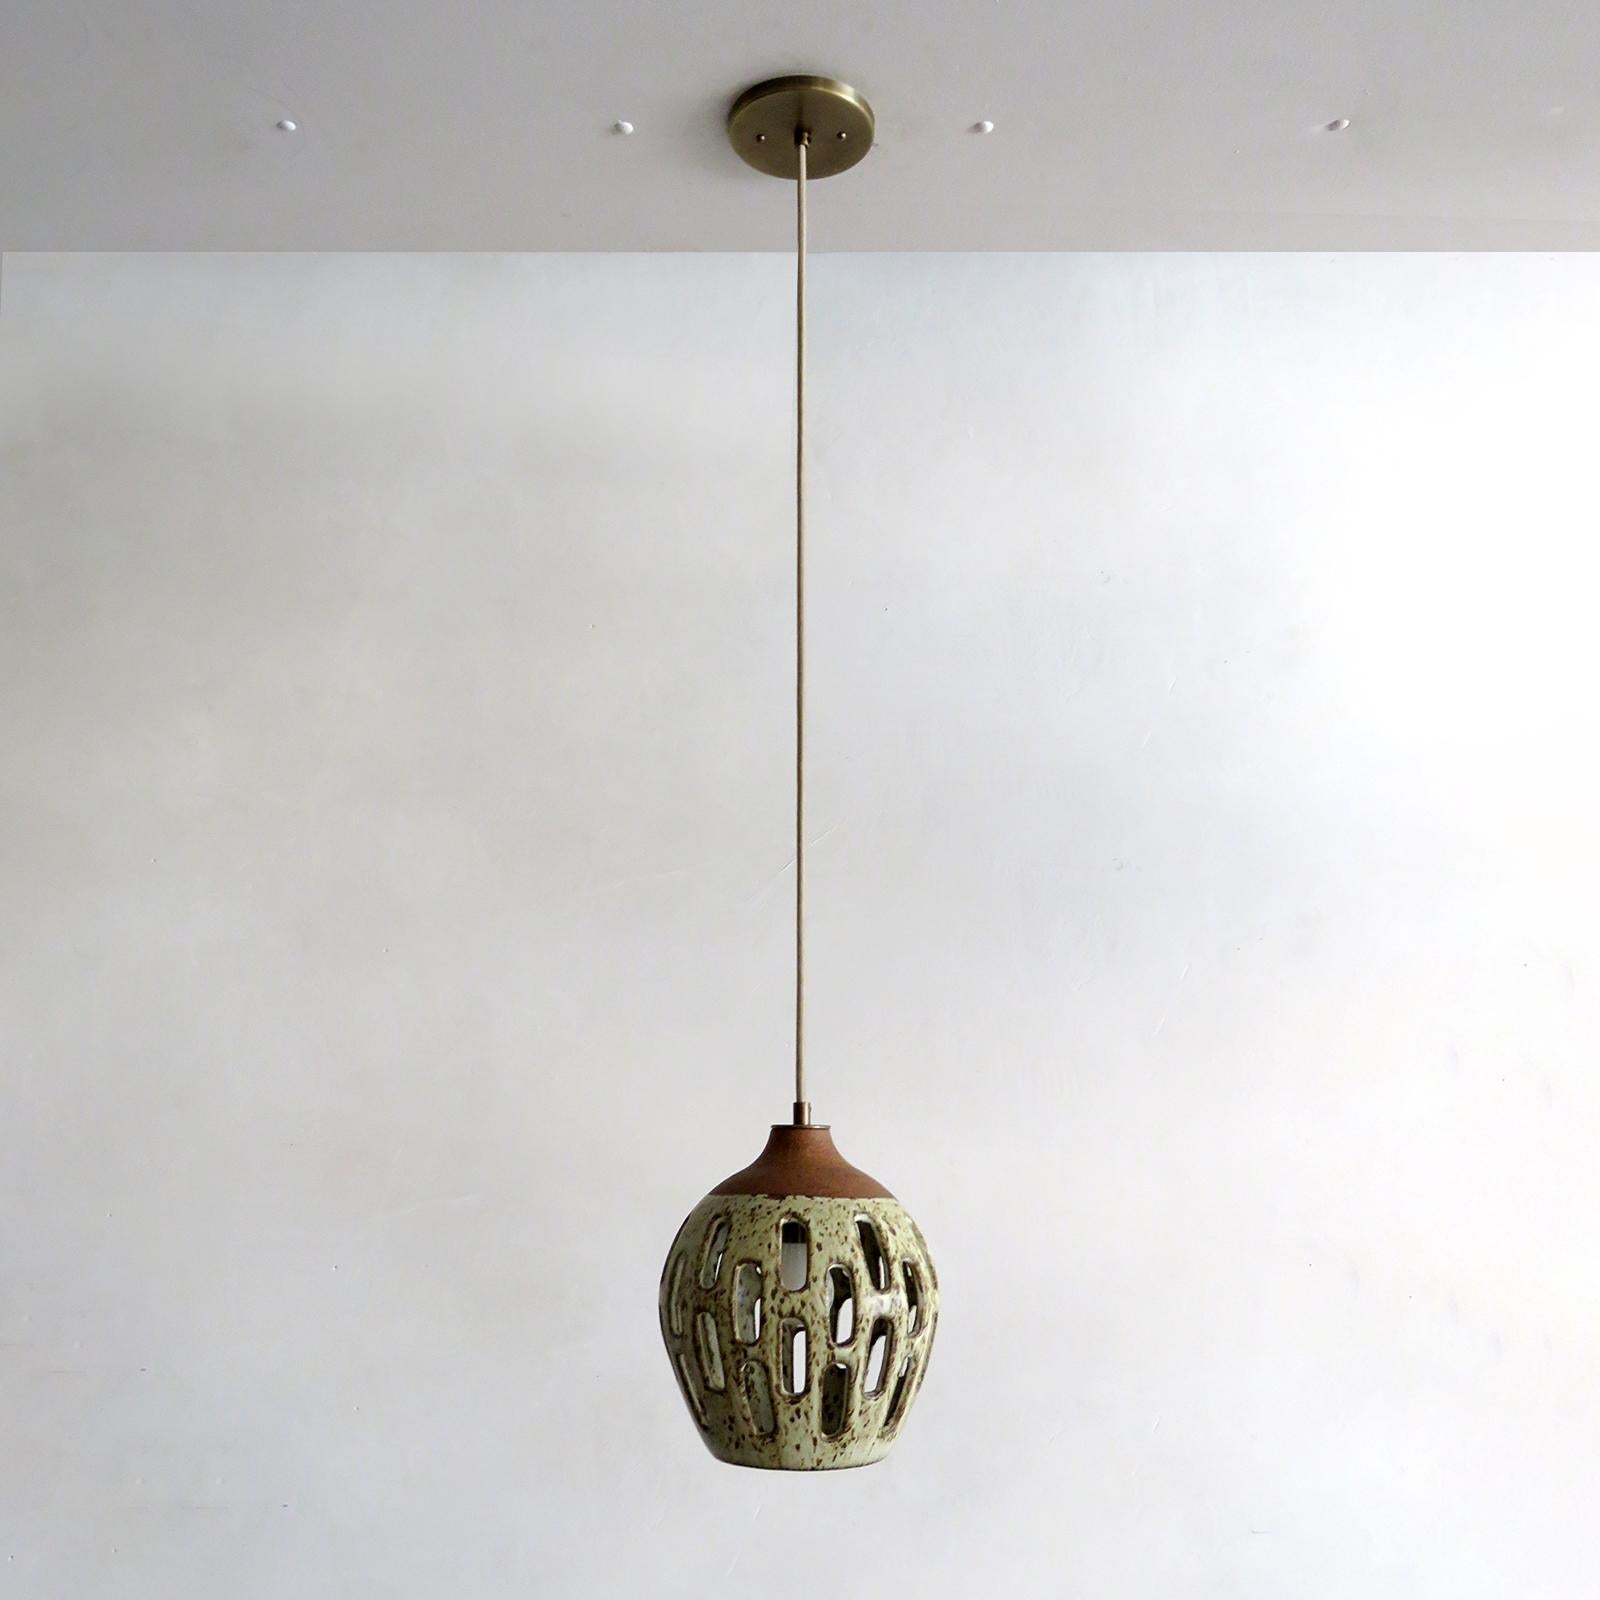 Ceramic Pendant Light No. 1003 by Heather Levine In New Condition For Sale In Los Angeles, CA